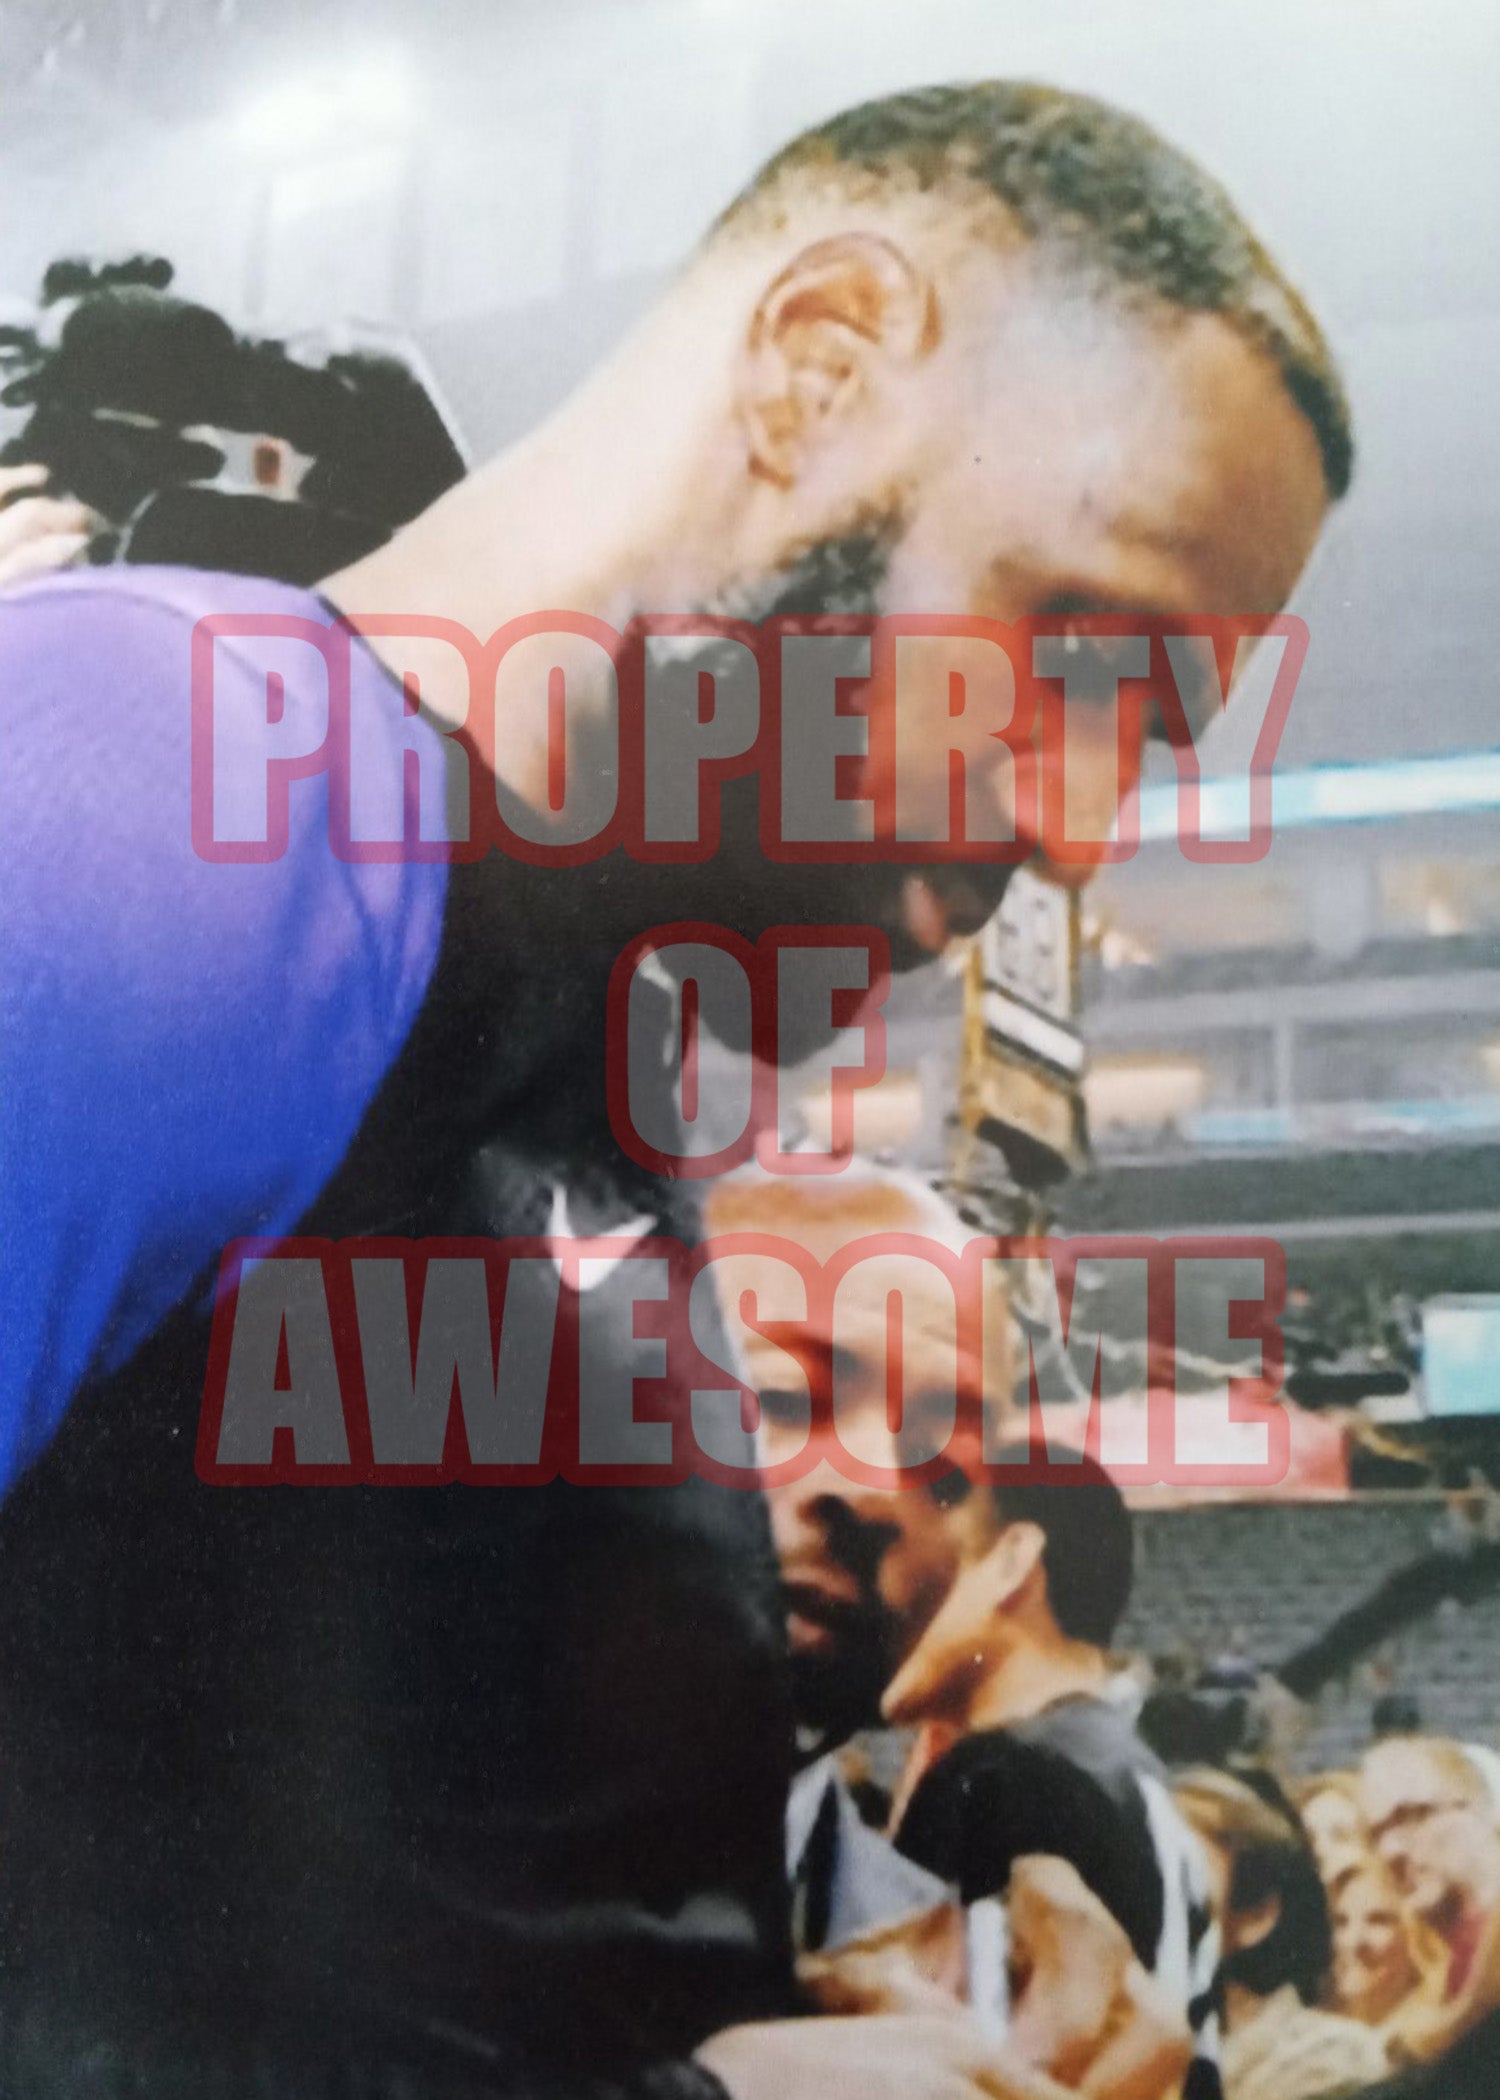 LeBron James Los Angeles Lakers 16x20 photograph signed with  proof